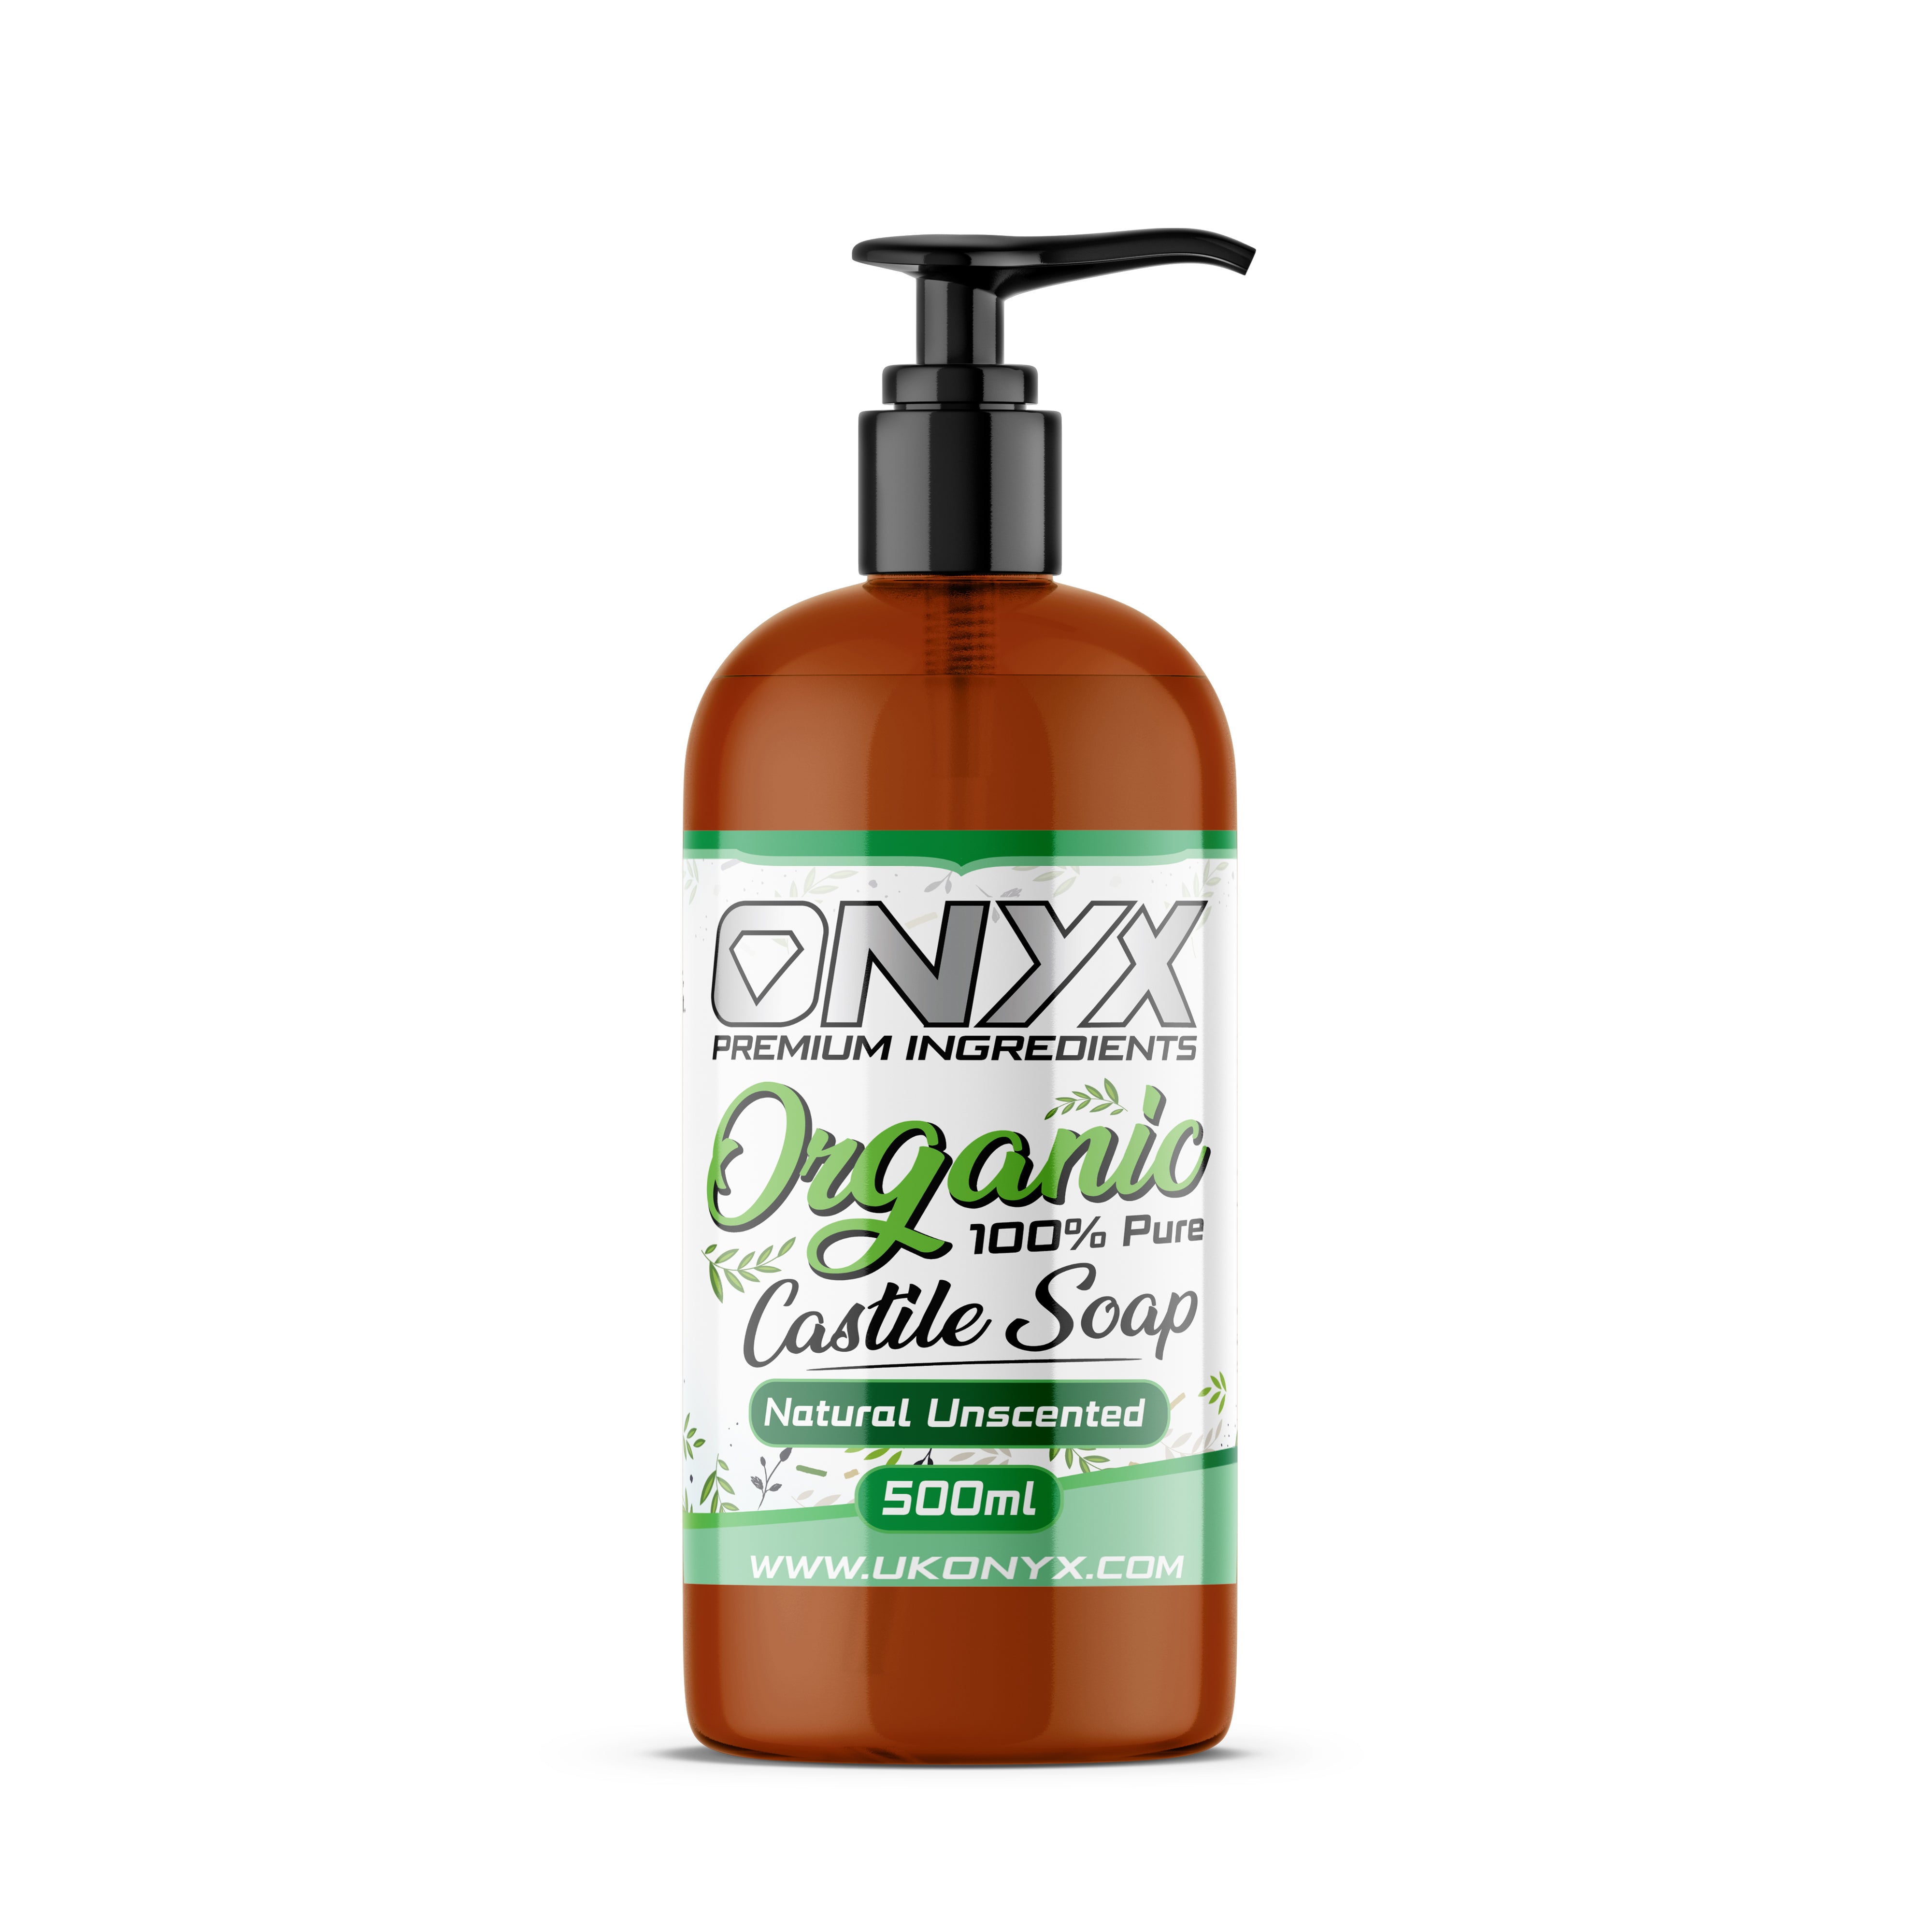 ONYX Organic Castile Soap 500ml bottle - 100% Pure Natural Unscented Soap for gentle and organic cleansing